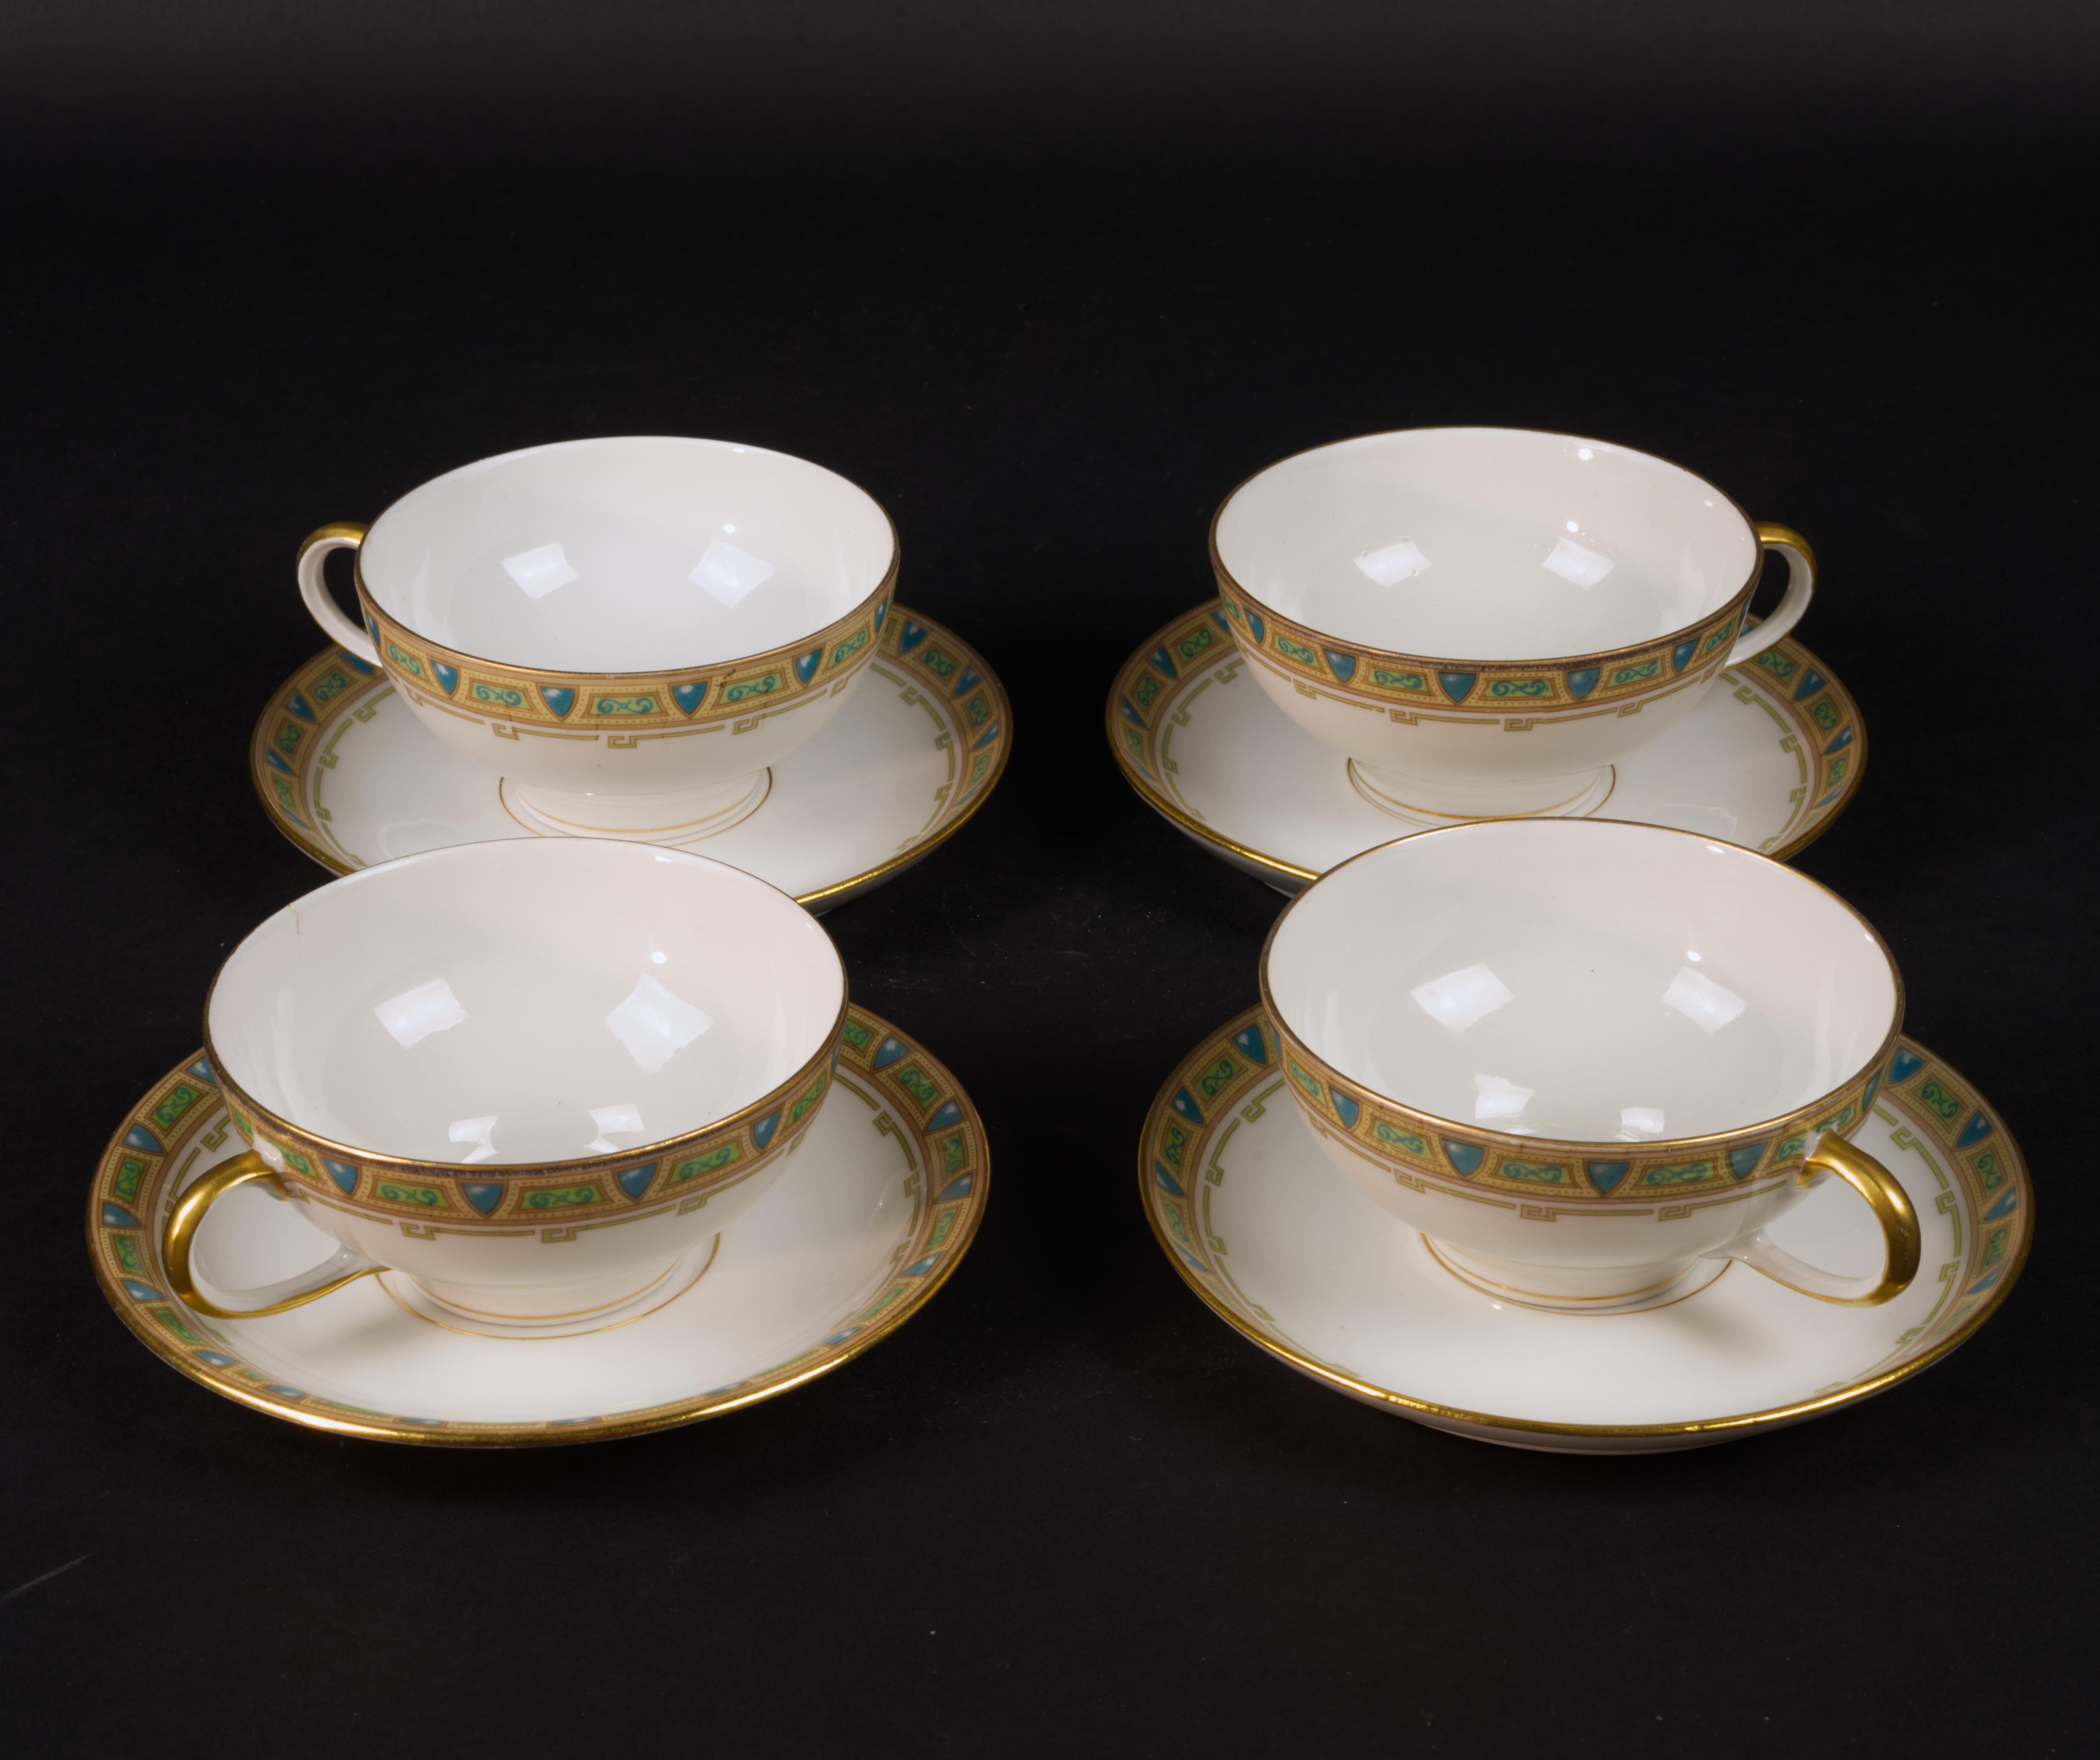 
Set of four cups and four saucers by Guerin &Co was made of fine, semi-transparent bone china in Limoges, France. The set is hand decorated in Neoclassical or Regency style with ornamental blue and beige border and gold trim on rims and cup